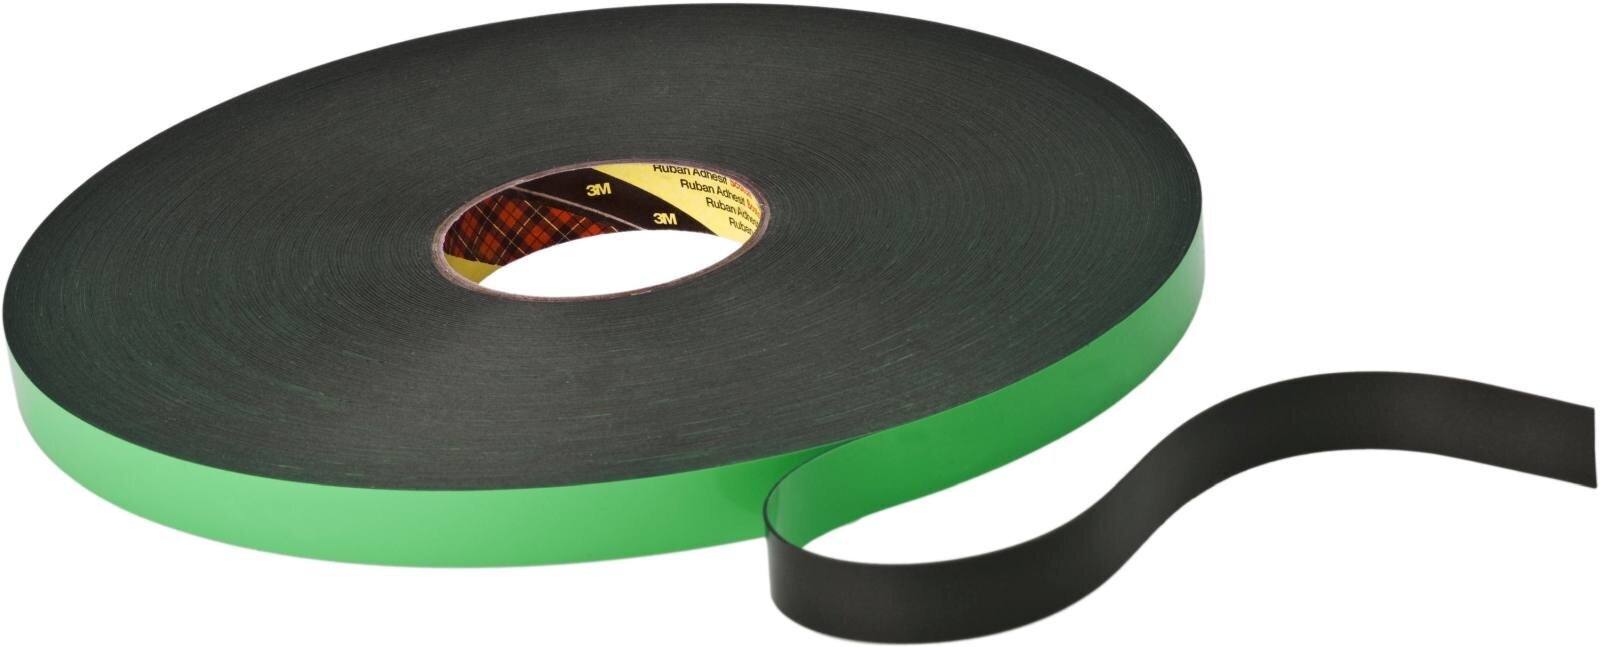 3M Double-sided PE foam tape with acrylic adhesive 9508B, black, 15 mm x 66 m, 0.8 mm